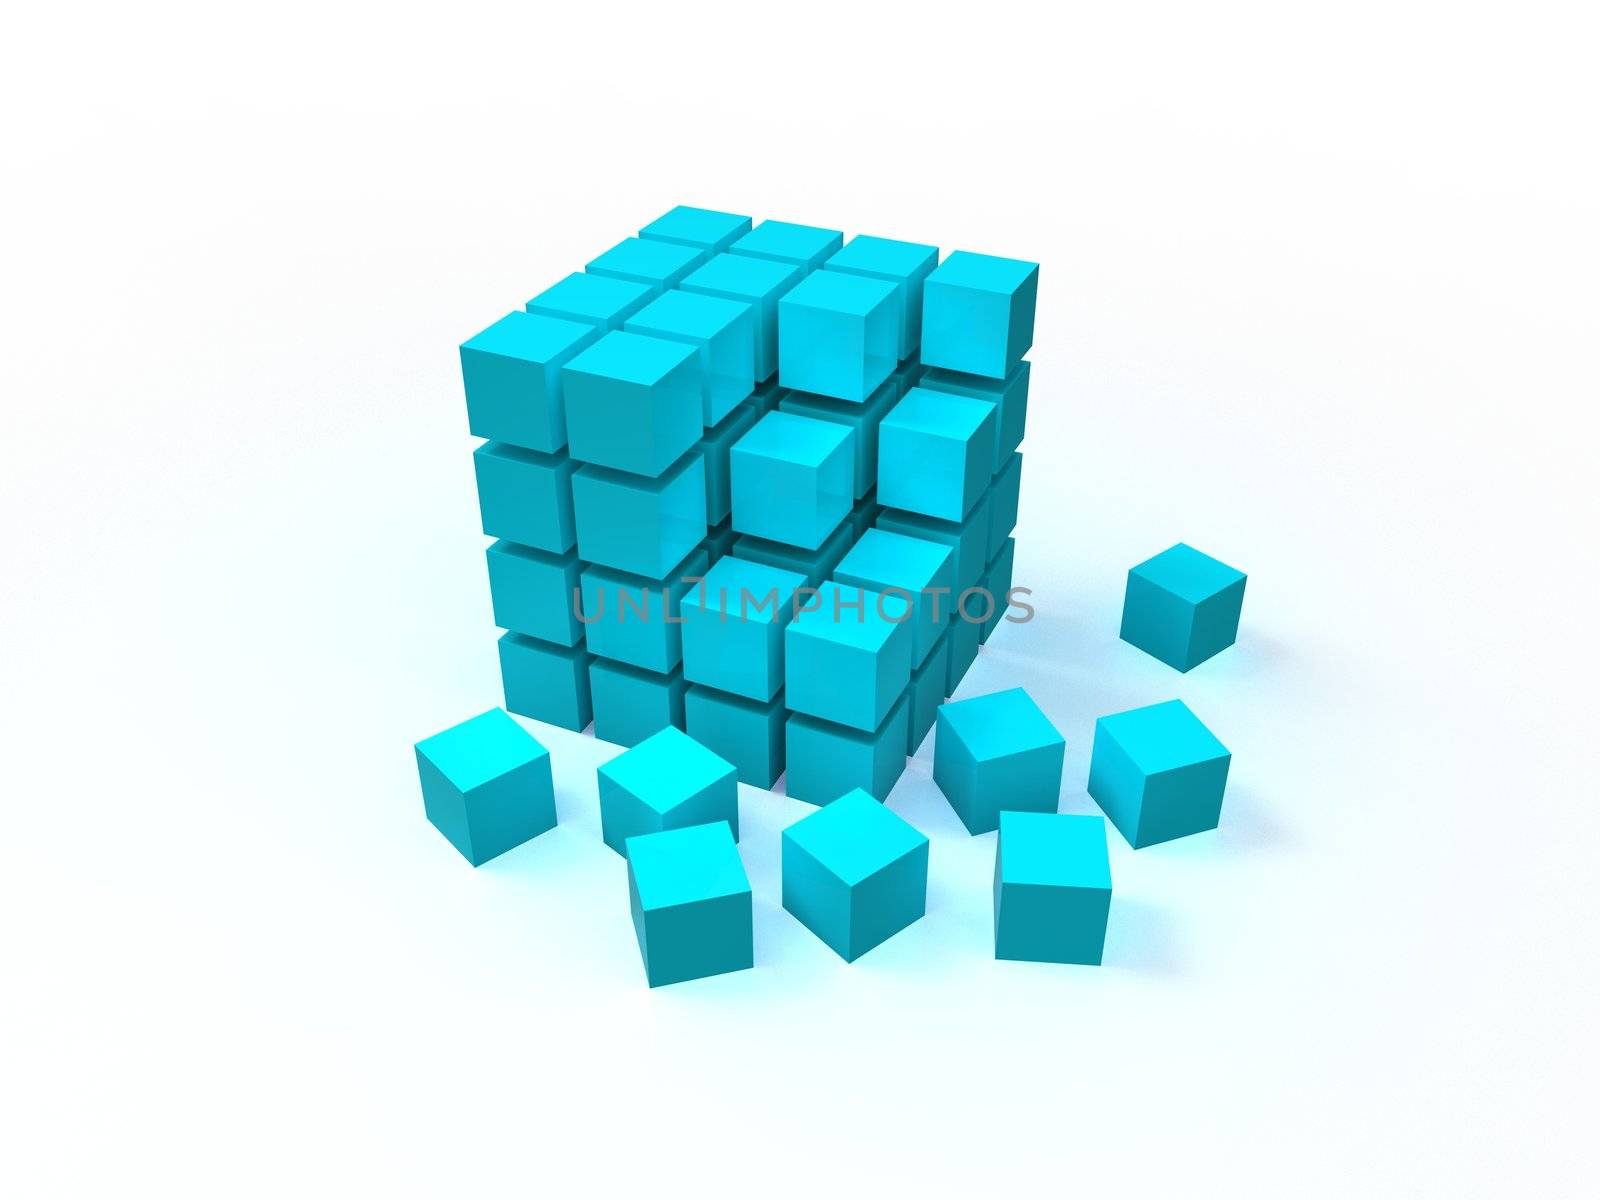 4x4 blue disordered cube assembling from blocks isolated on white background by vermicule